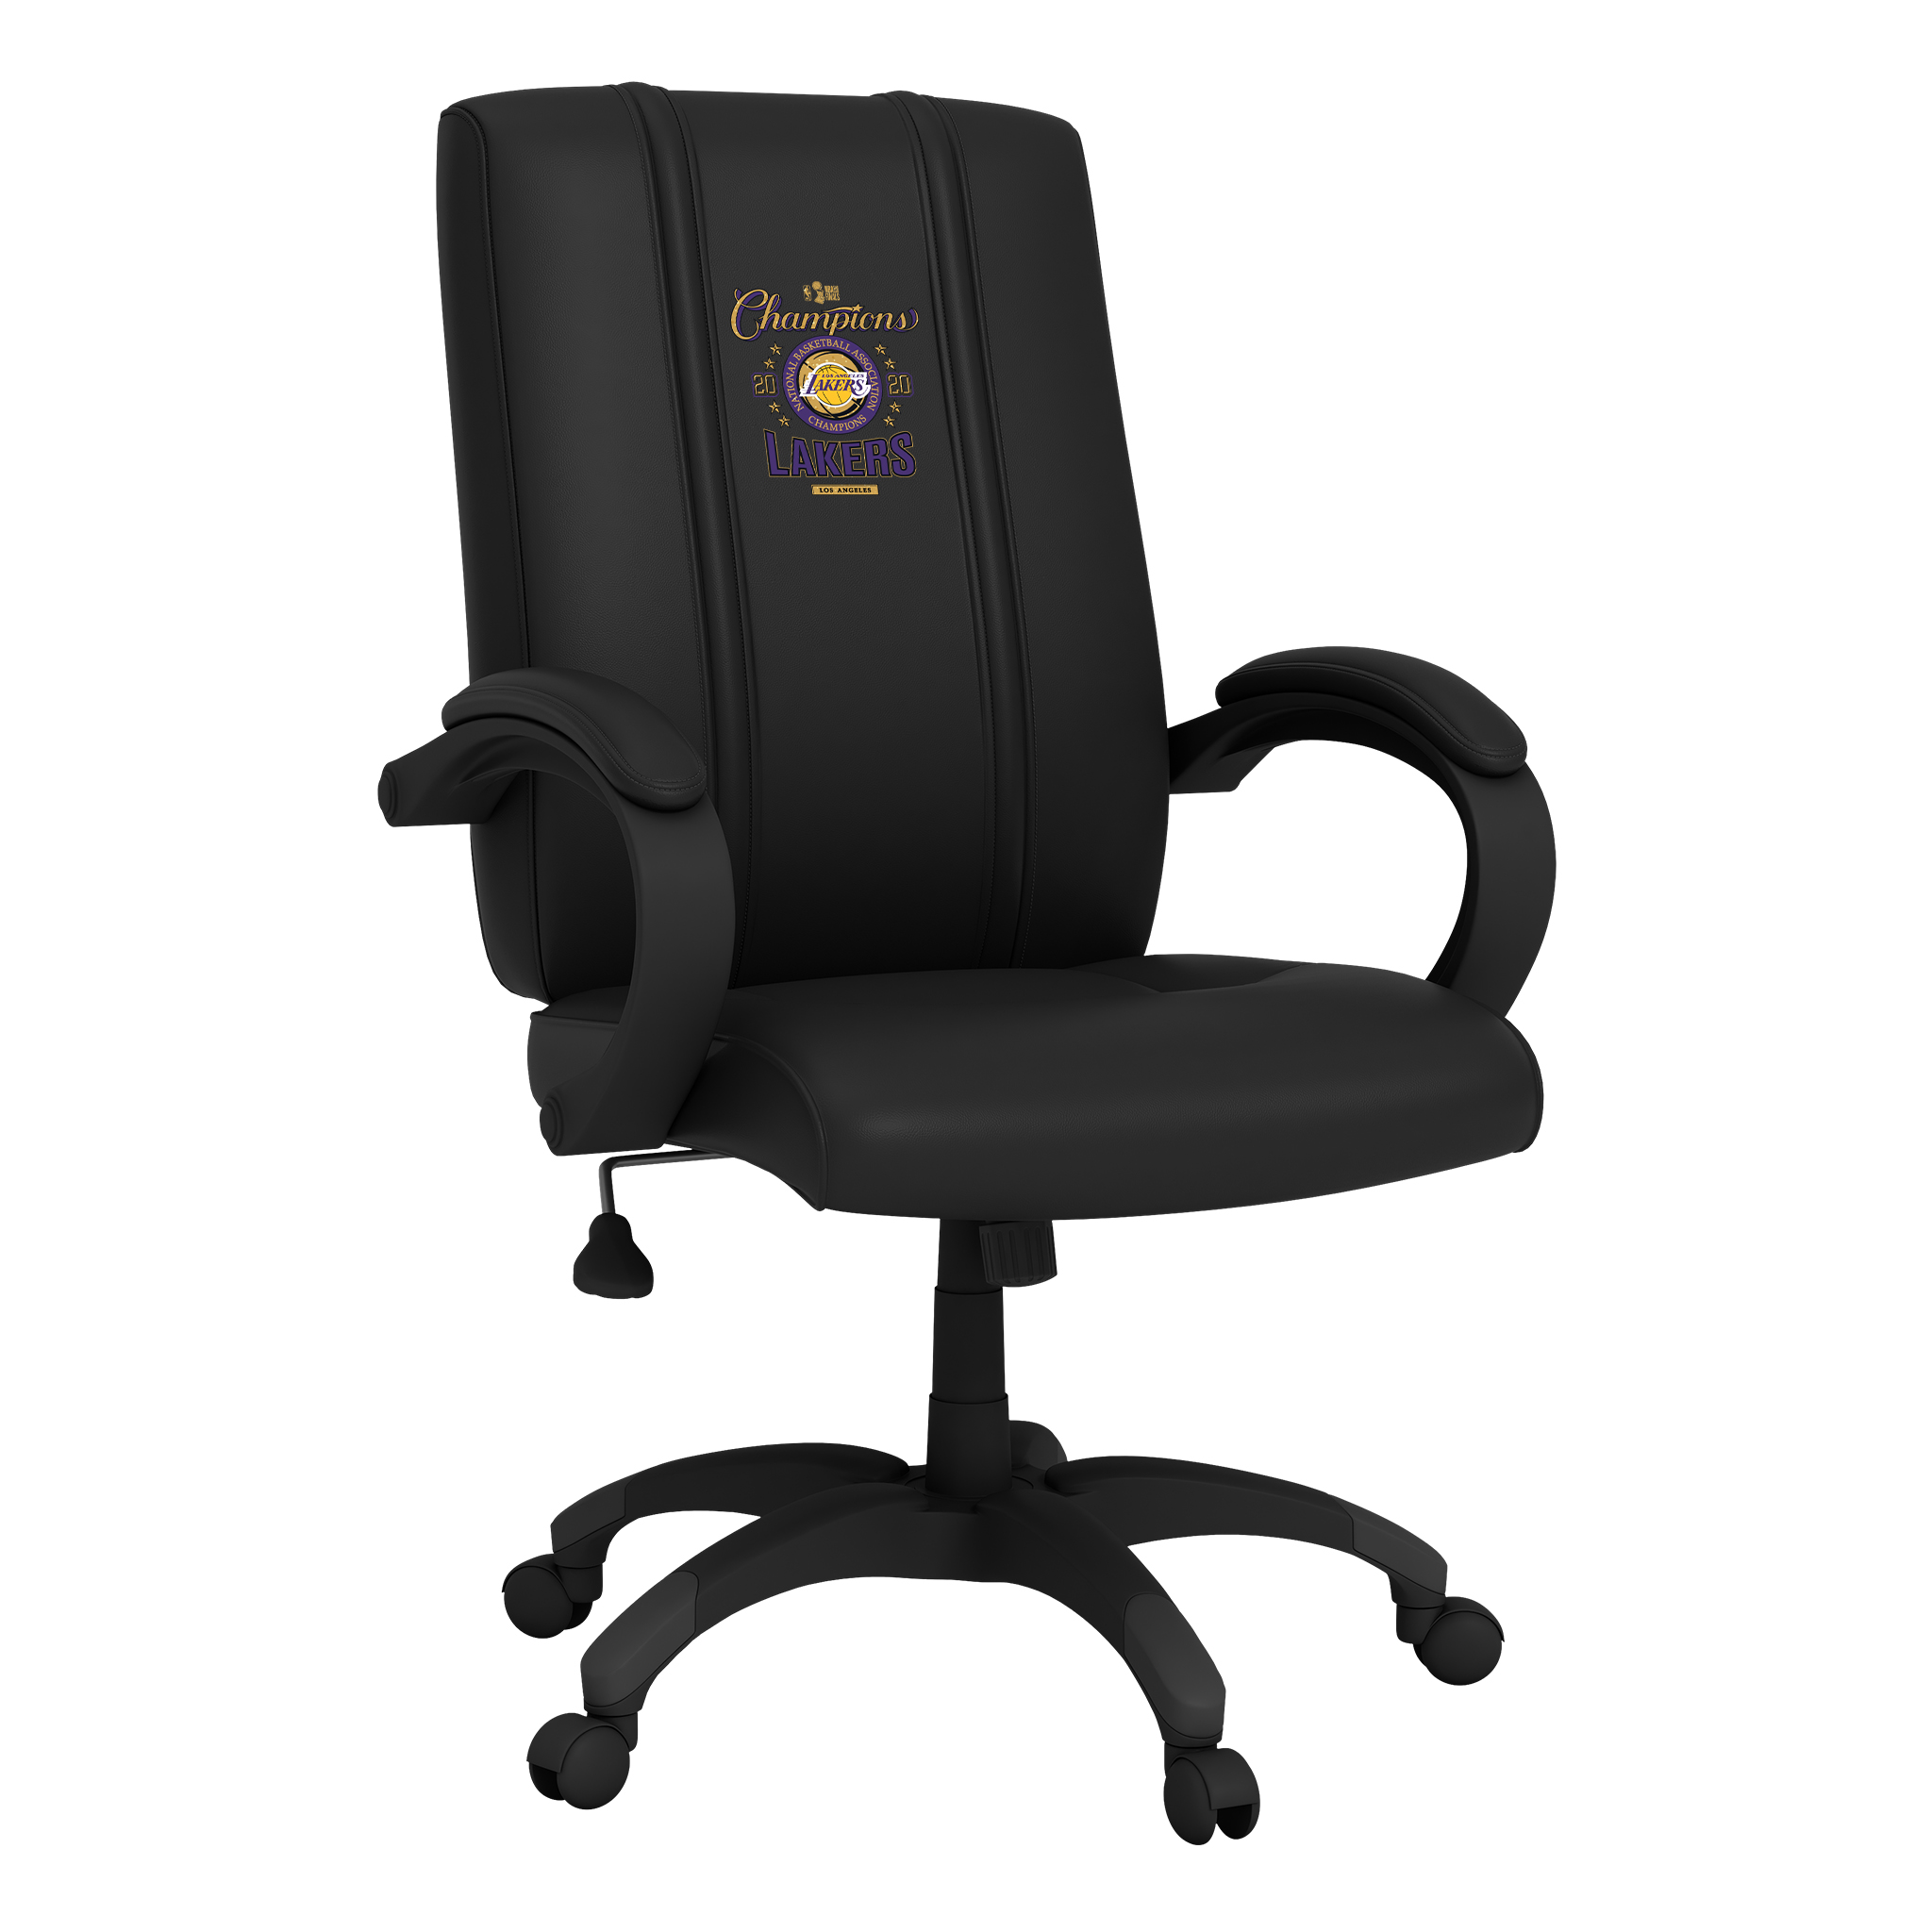 Los Angeles Lakers Office Chair 1000 with Los Angeles Lakers 2020 Champions Logo